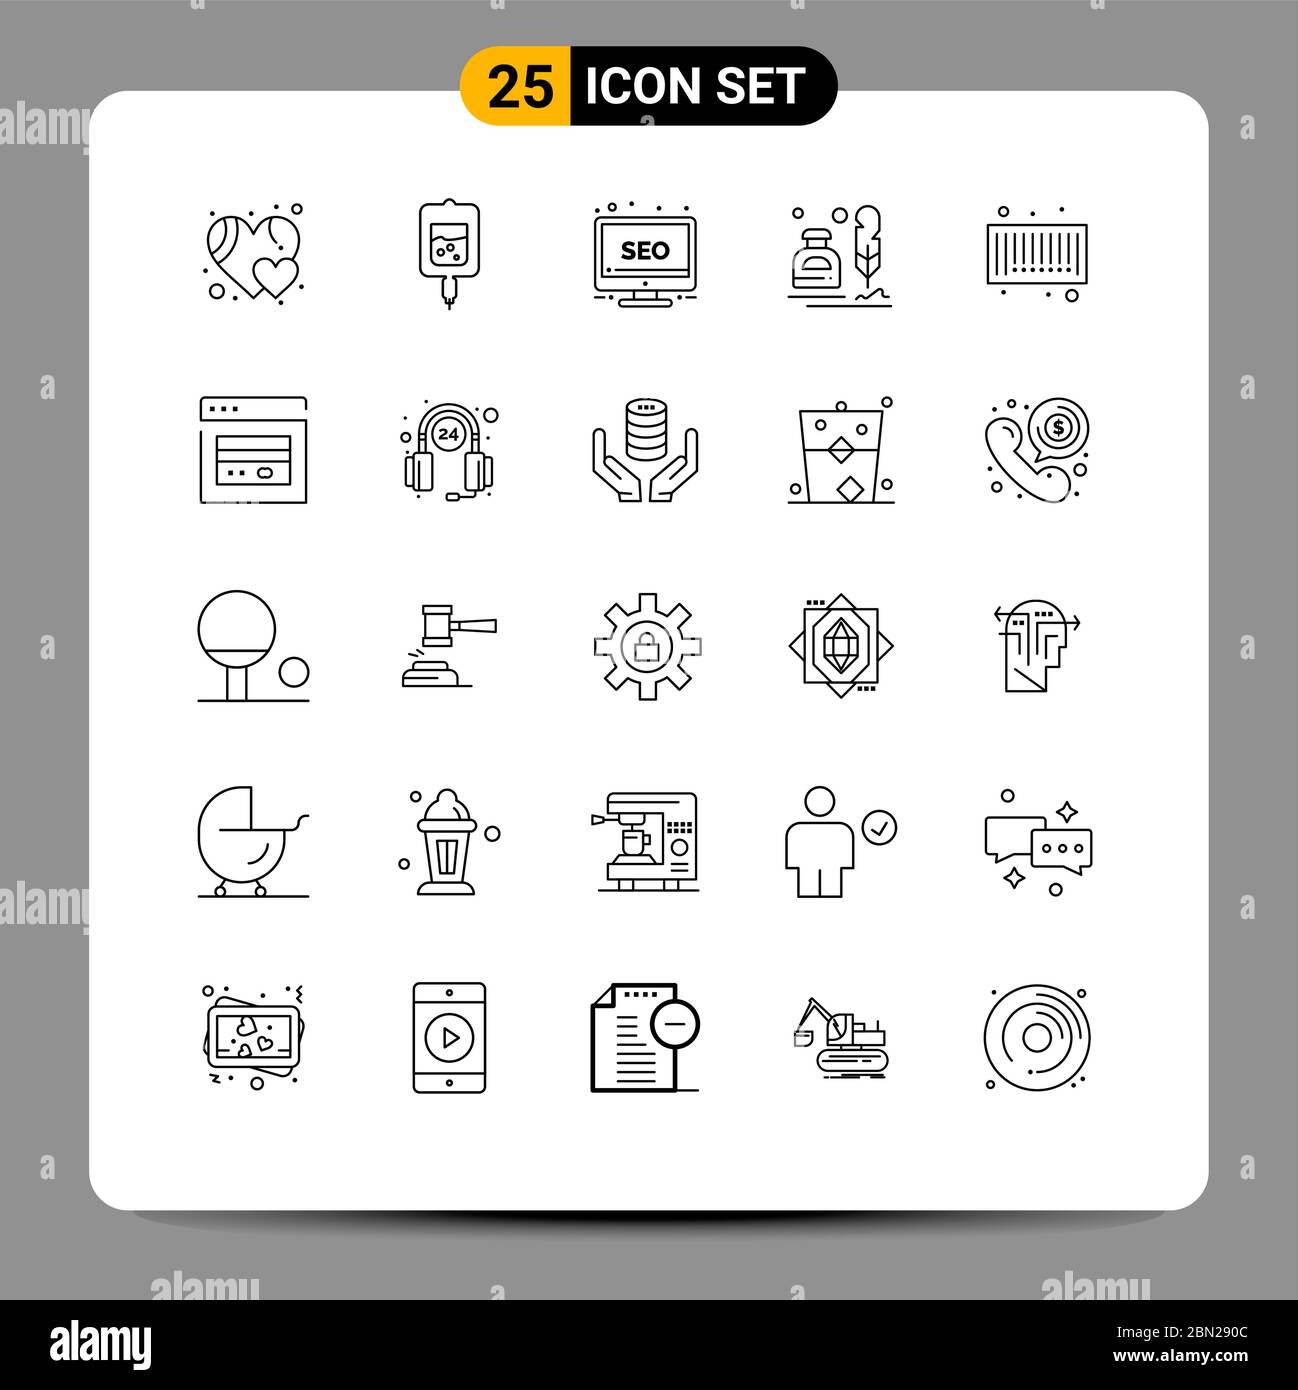 Stock Vector Icon Pack of 25 Line Signs and Symbols for barcode, office, seo, letter, erite Editable Vector Design Elements Stock Vector